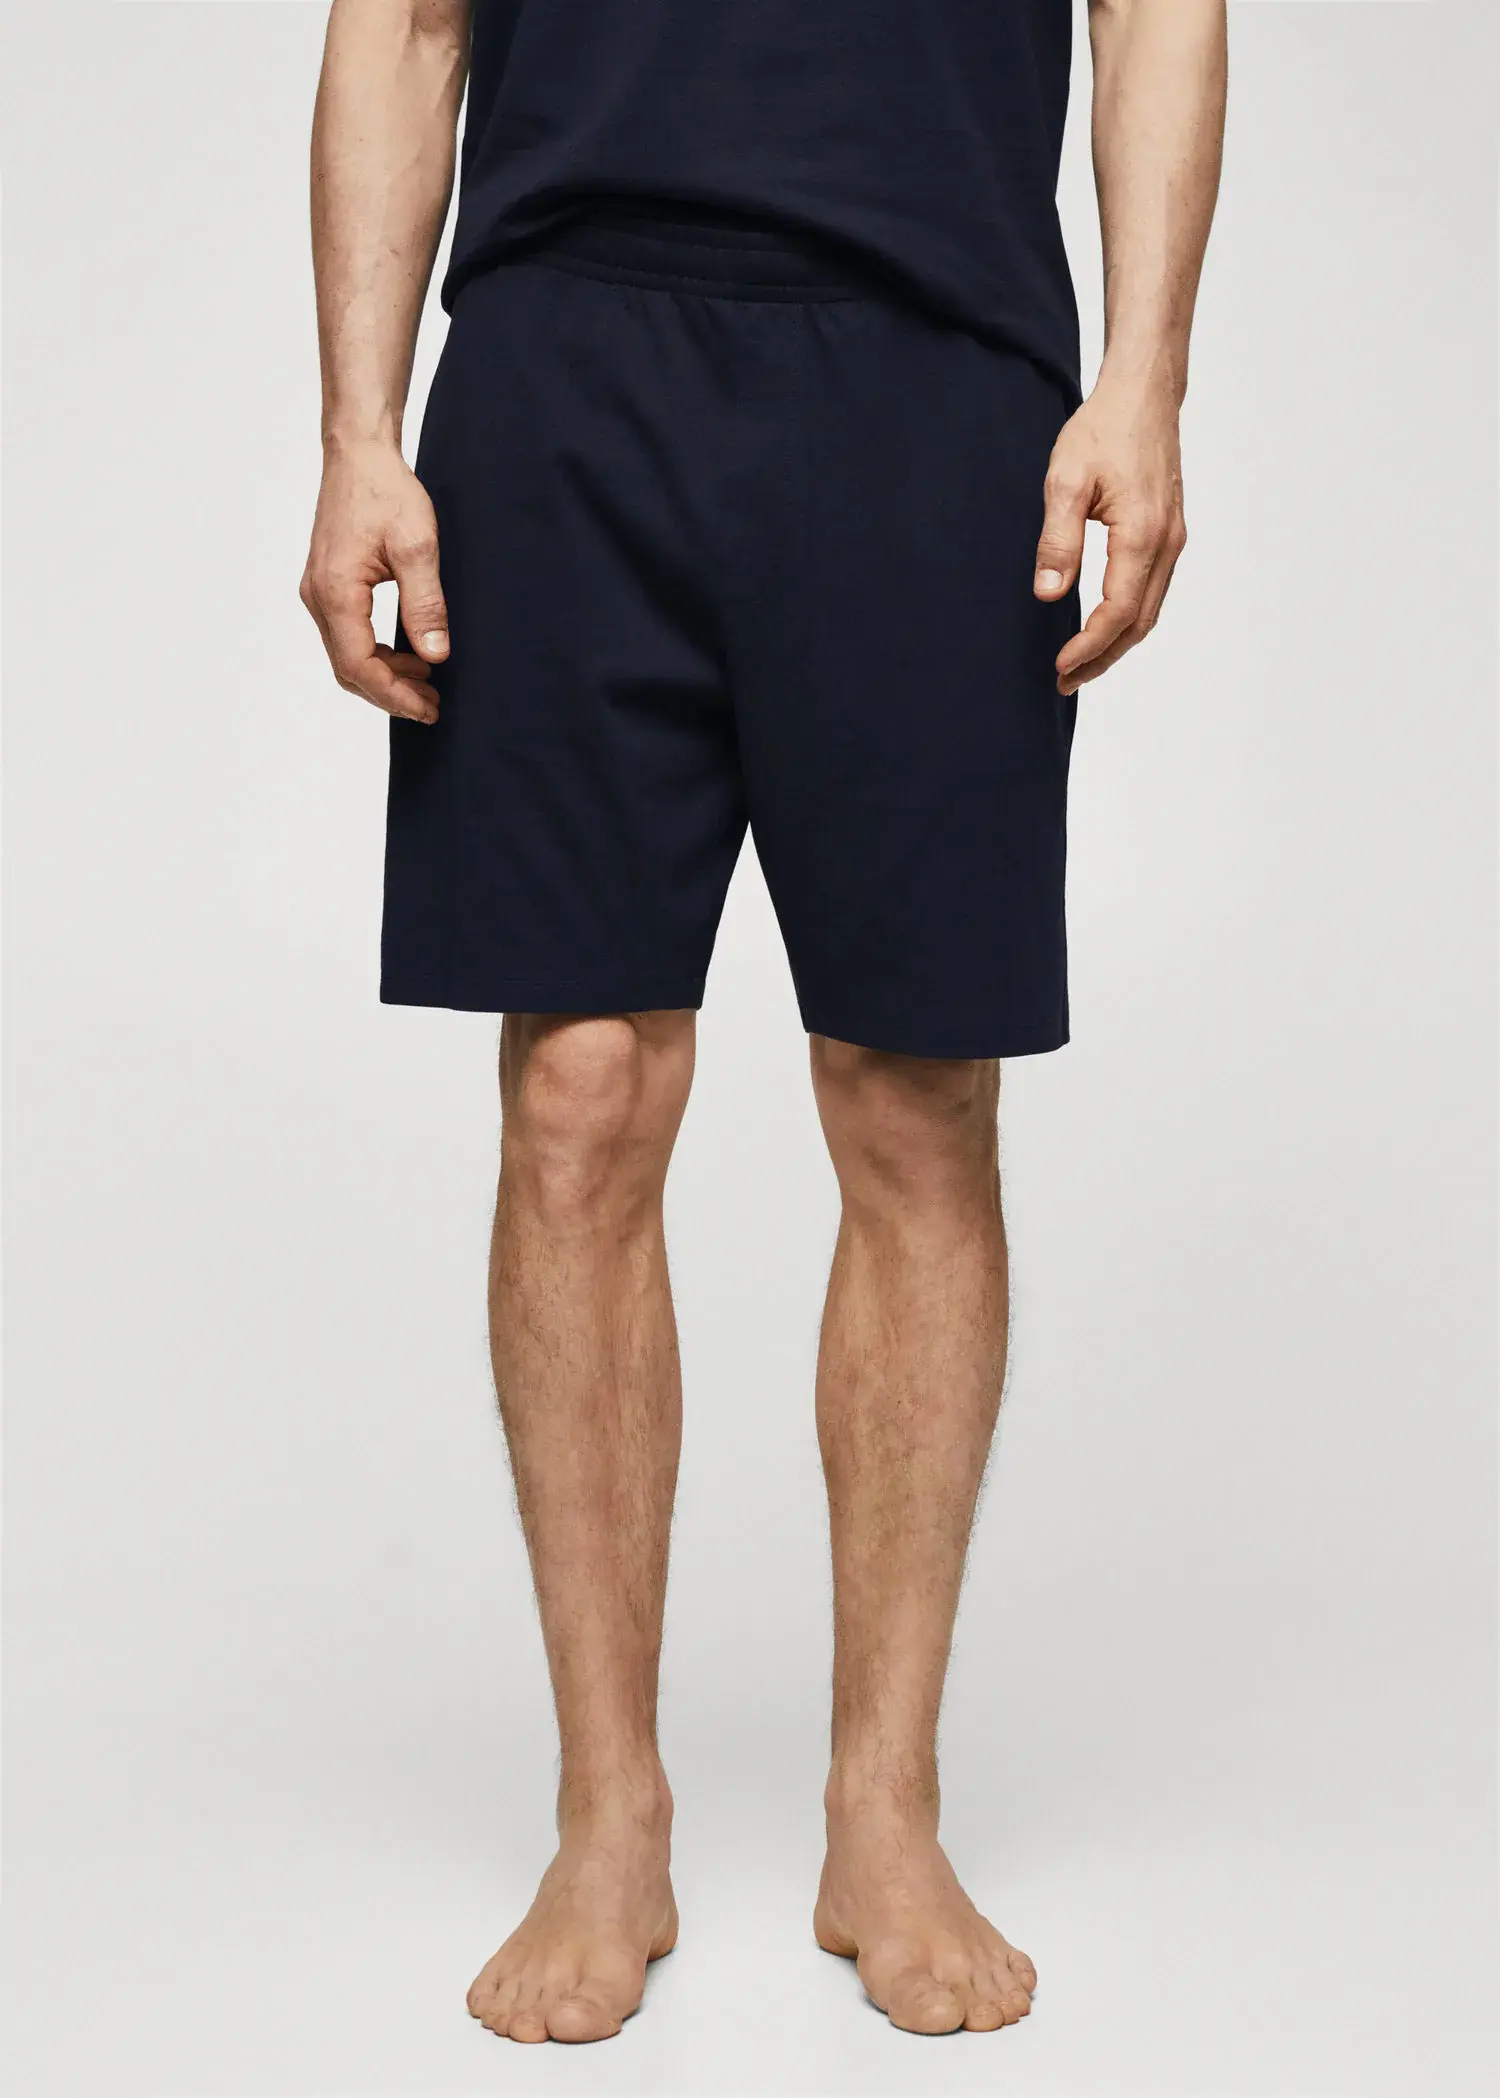 Mango Cotton pajama shorts pack. a man in black shorts is standing up. 